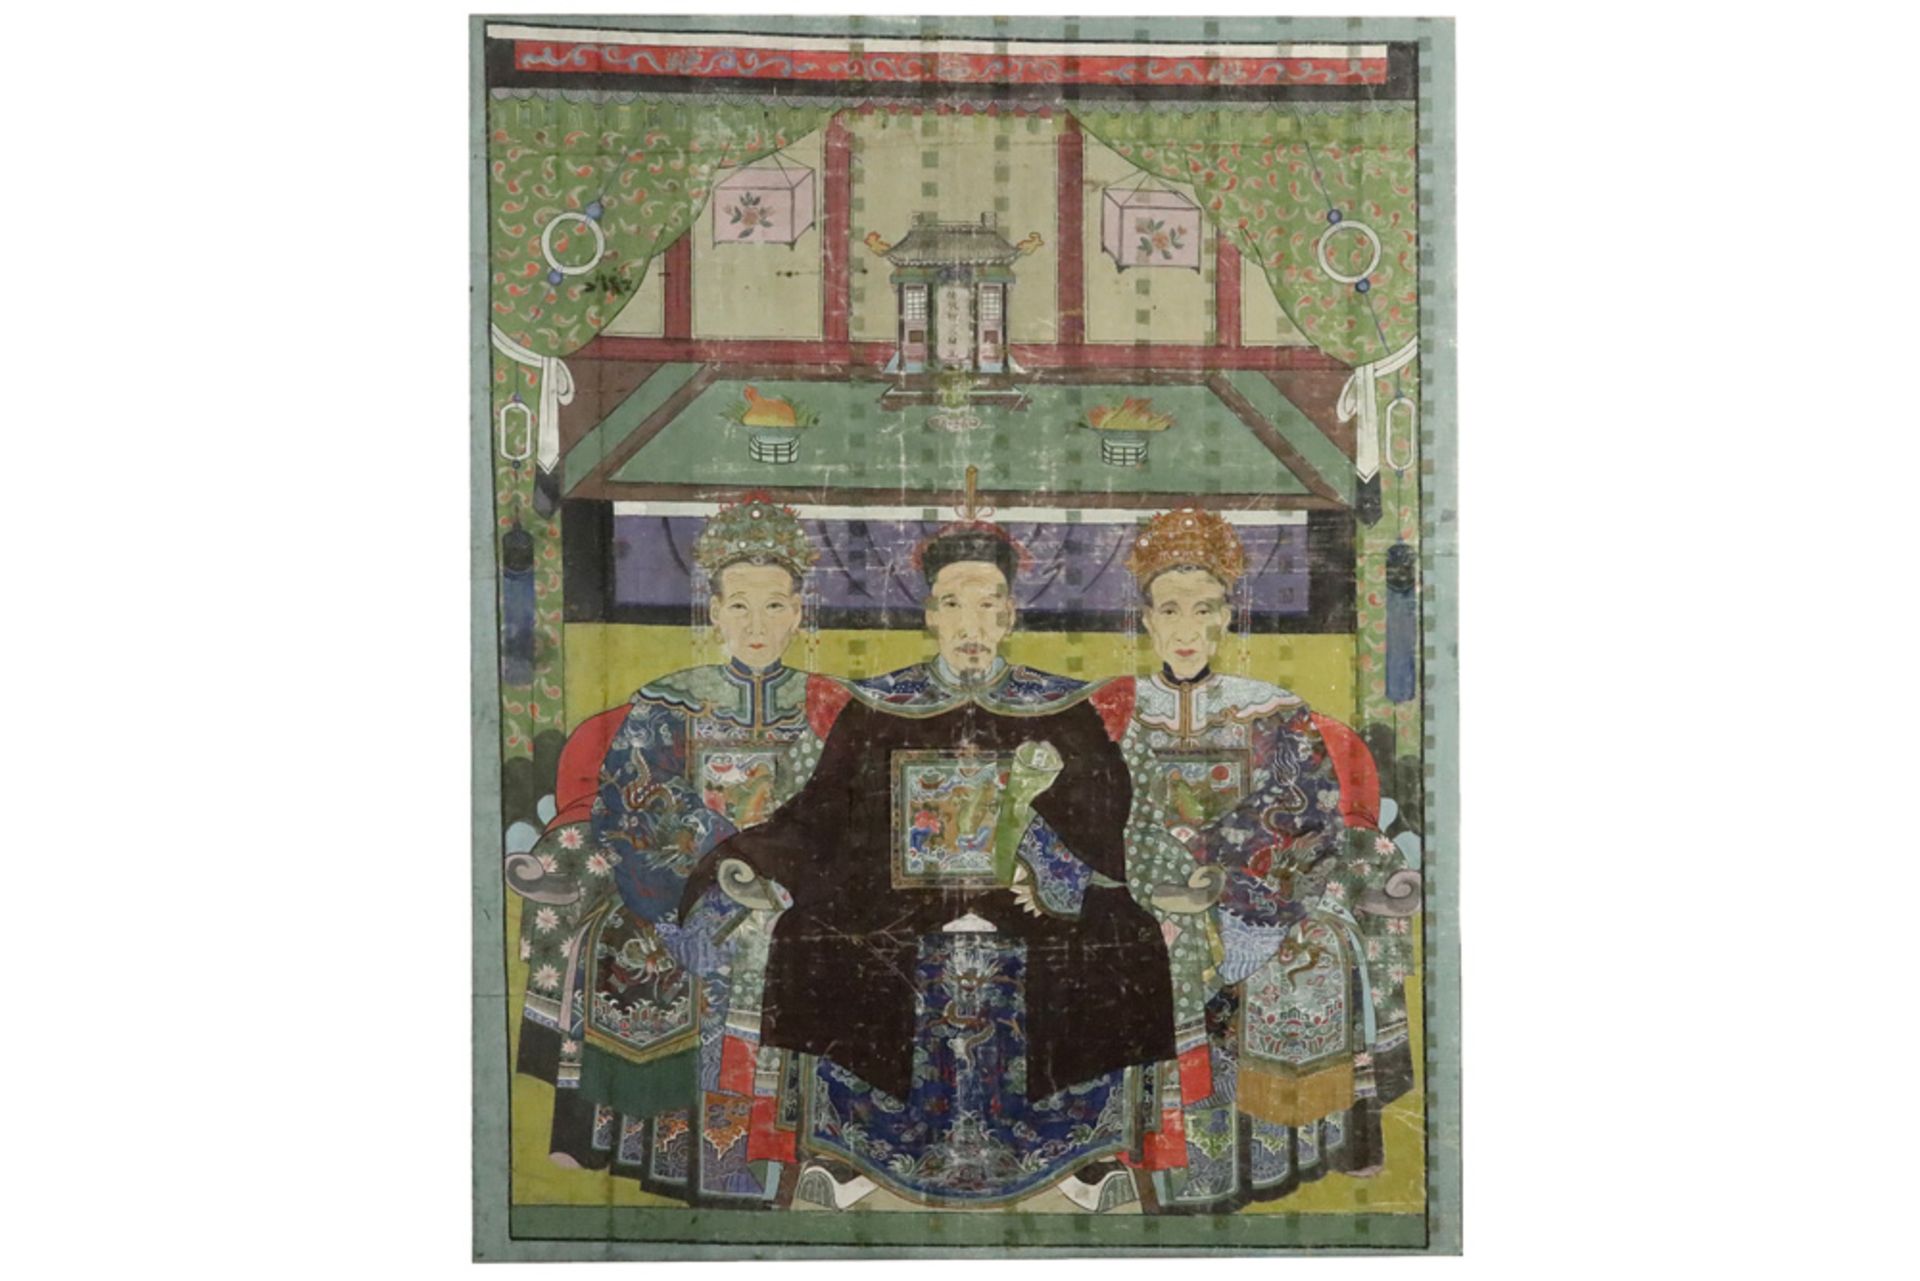 antique Chinese "Family portrait" painting on canvas || Antieke Chinese schildering op doek : "